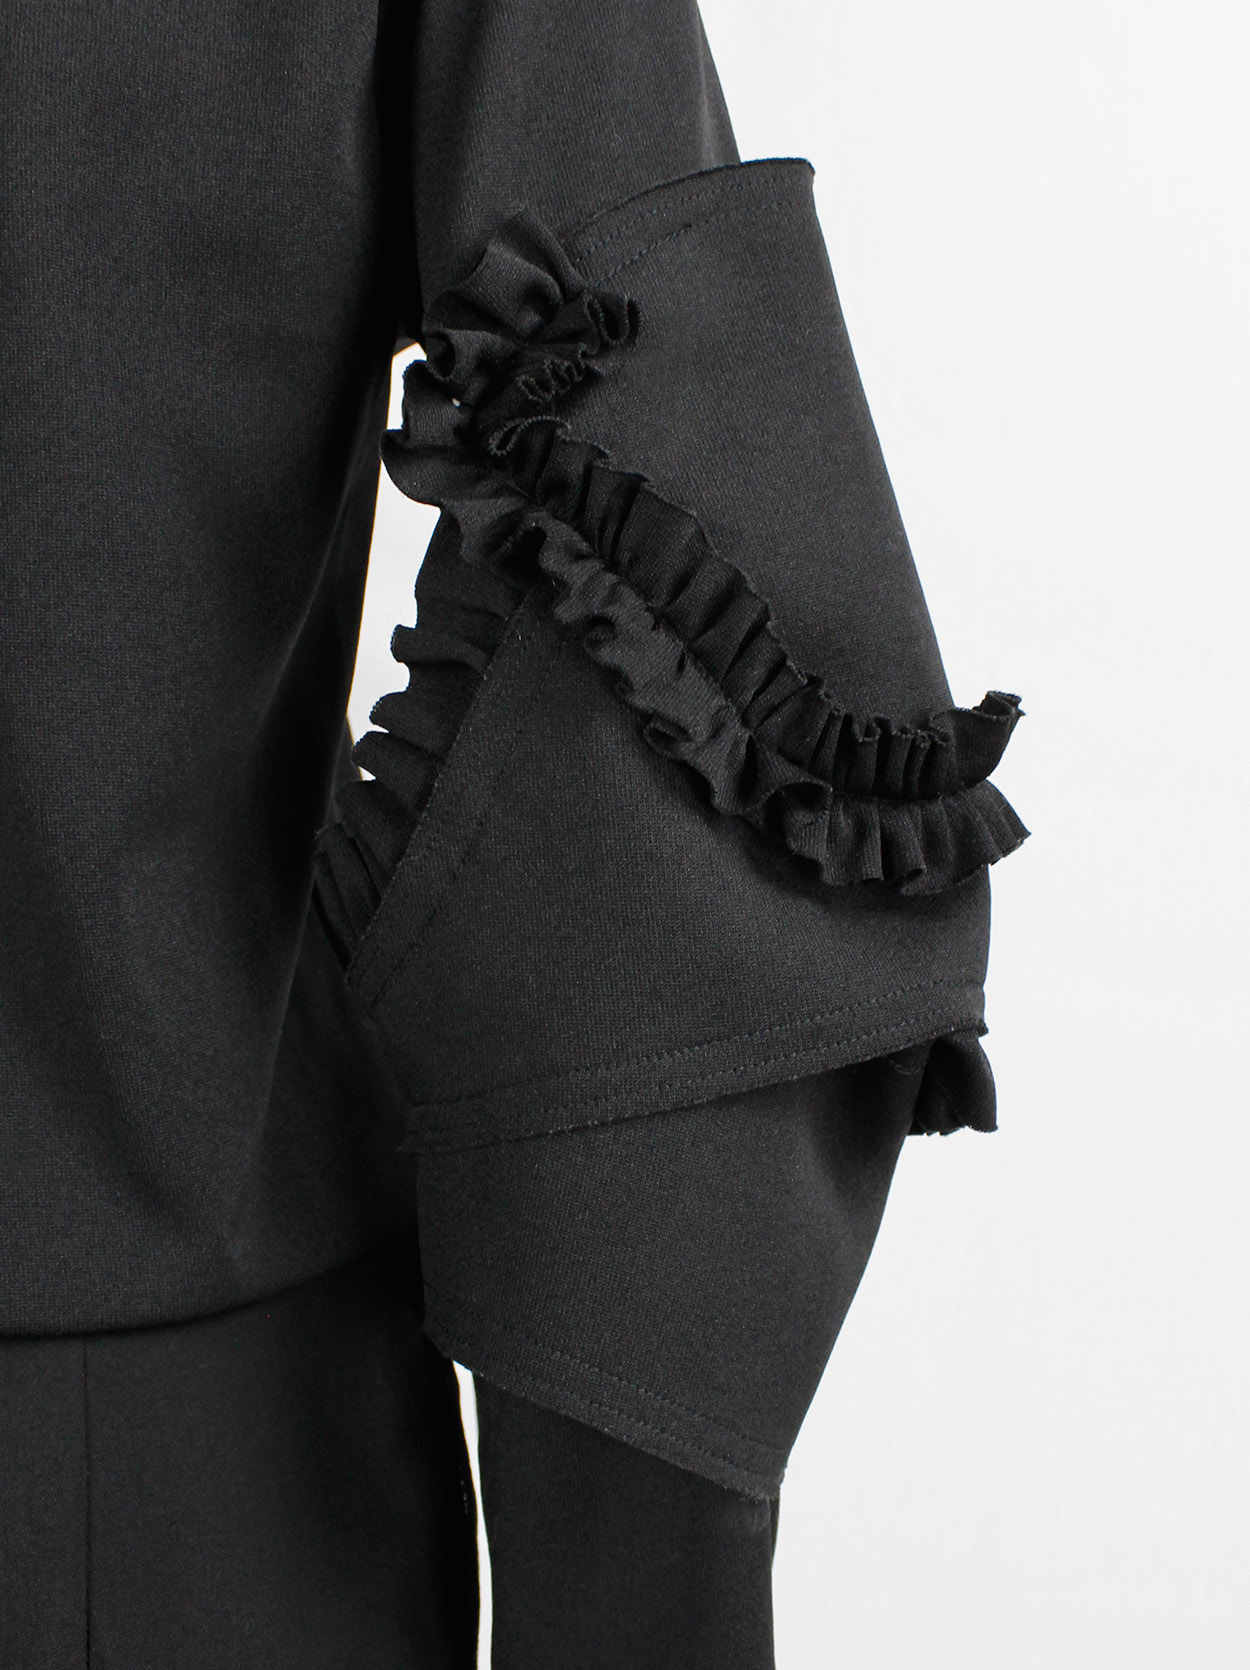 Comme des Garçons black jumper with three-dimensional armor sleeves ...